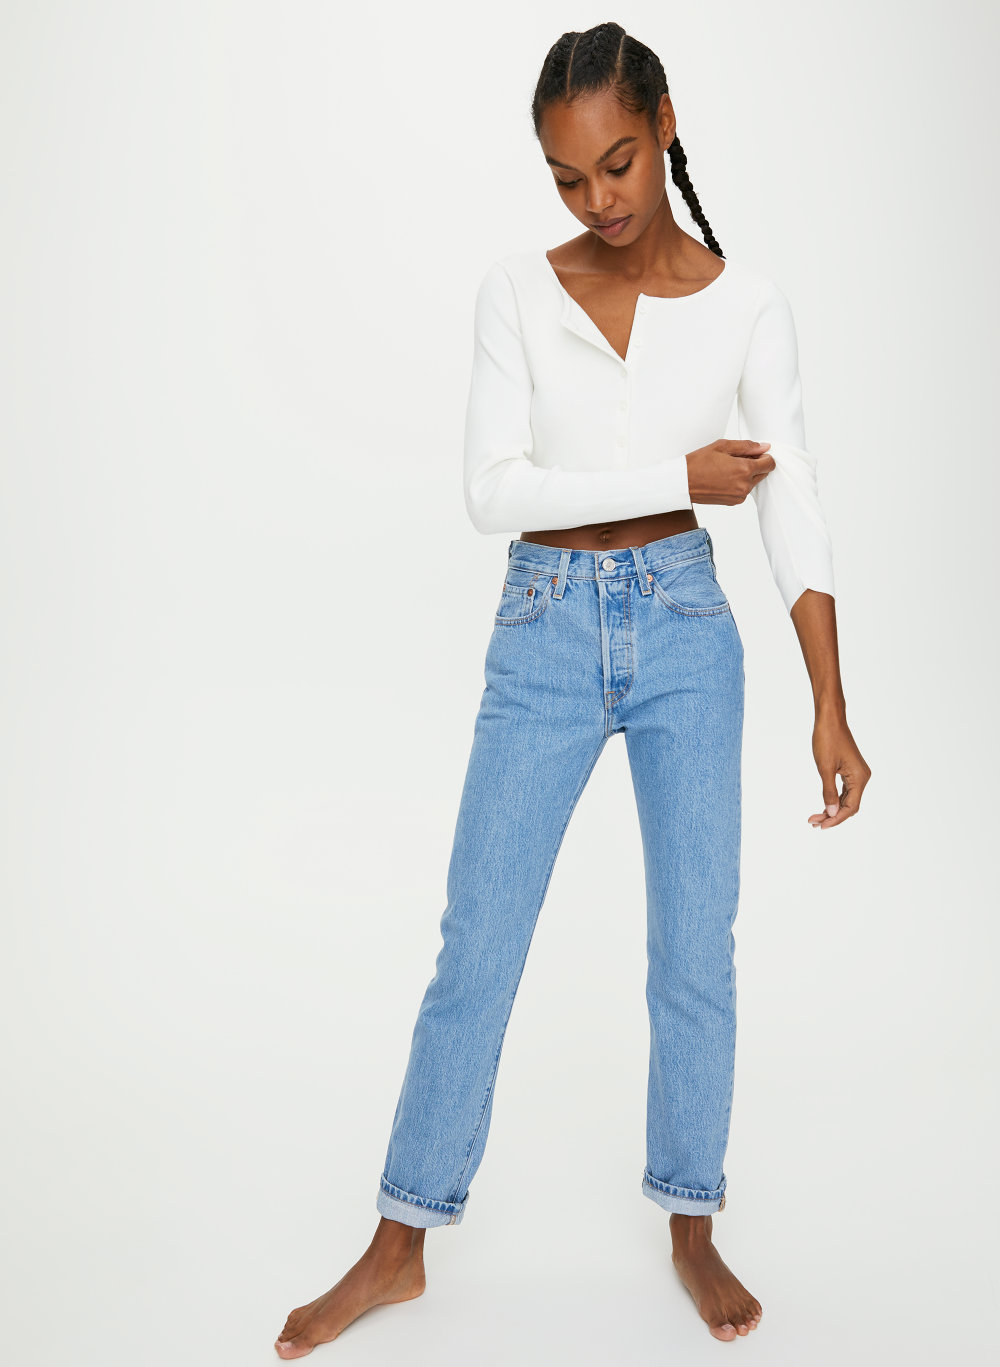 levis 501 straight jeans